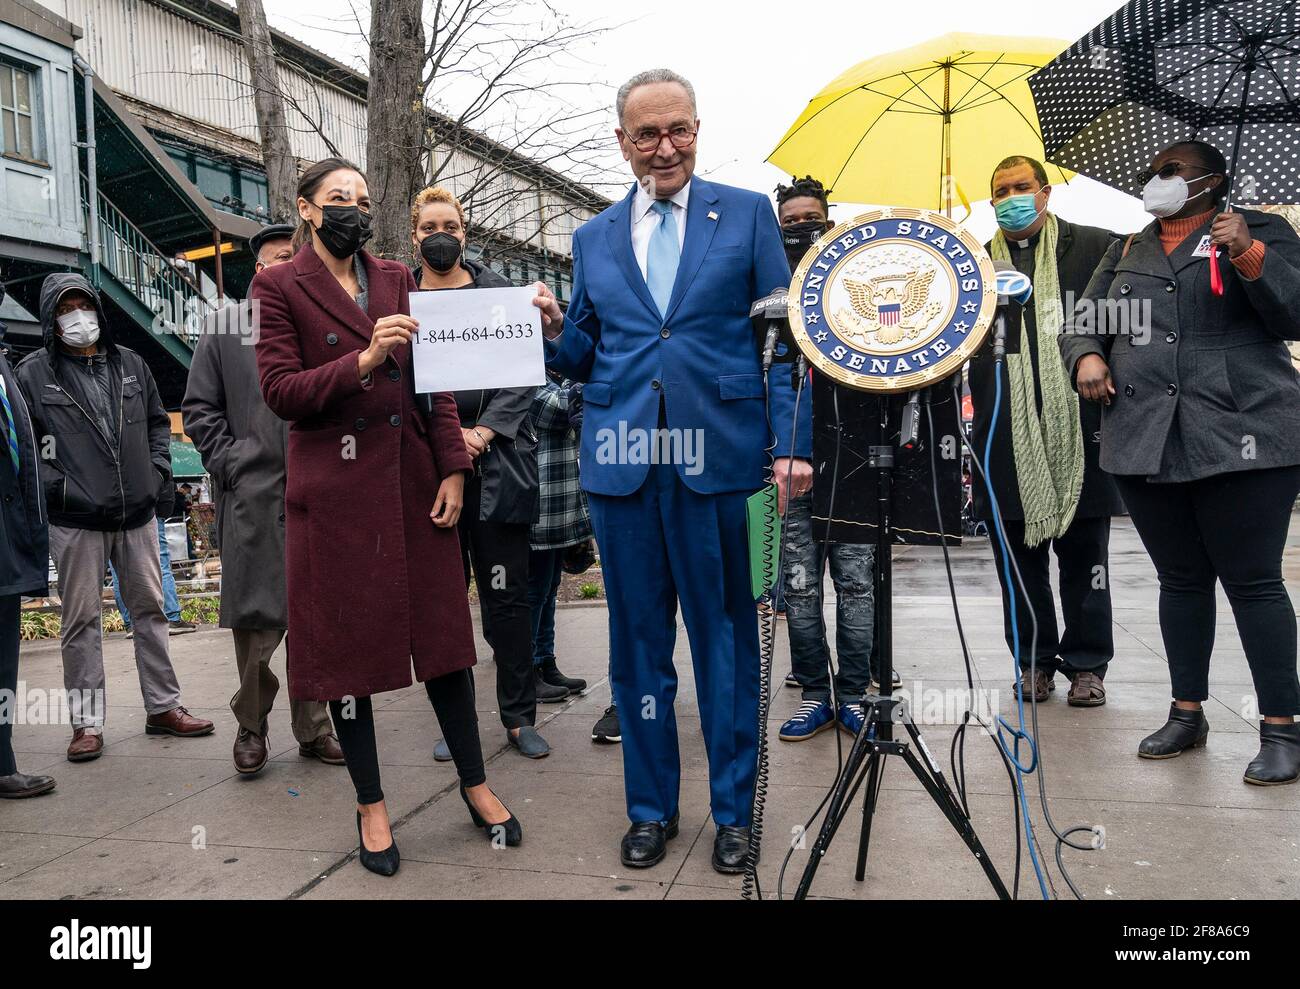 U. S. Representative Alexandria Ocasio-Cortez and Senate Majority Leader Charles Schumer hold paper with printed FEMA hotline number for help with funeral expenses for COVID-19 related deaths at joint presser on Corona Plaza. U.S. Senator Charles Schumer and Congresswoman Alexandria Ocasio-Cortez announced the Federal Emergency Management Administration hotline number to help pay for the funeral and burial of COVID-hit families that cannot afford it. During announcement Schumer and Ocasio-Cortez were joined by local activists and residents. (Photo by Lev Radin/Pacific Press) Stock Photo